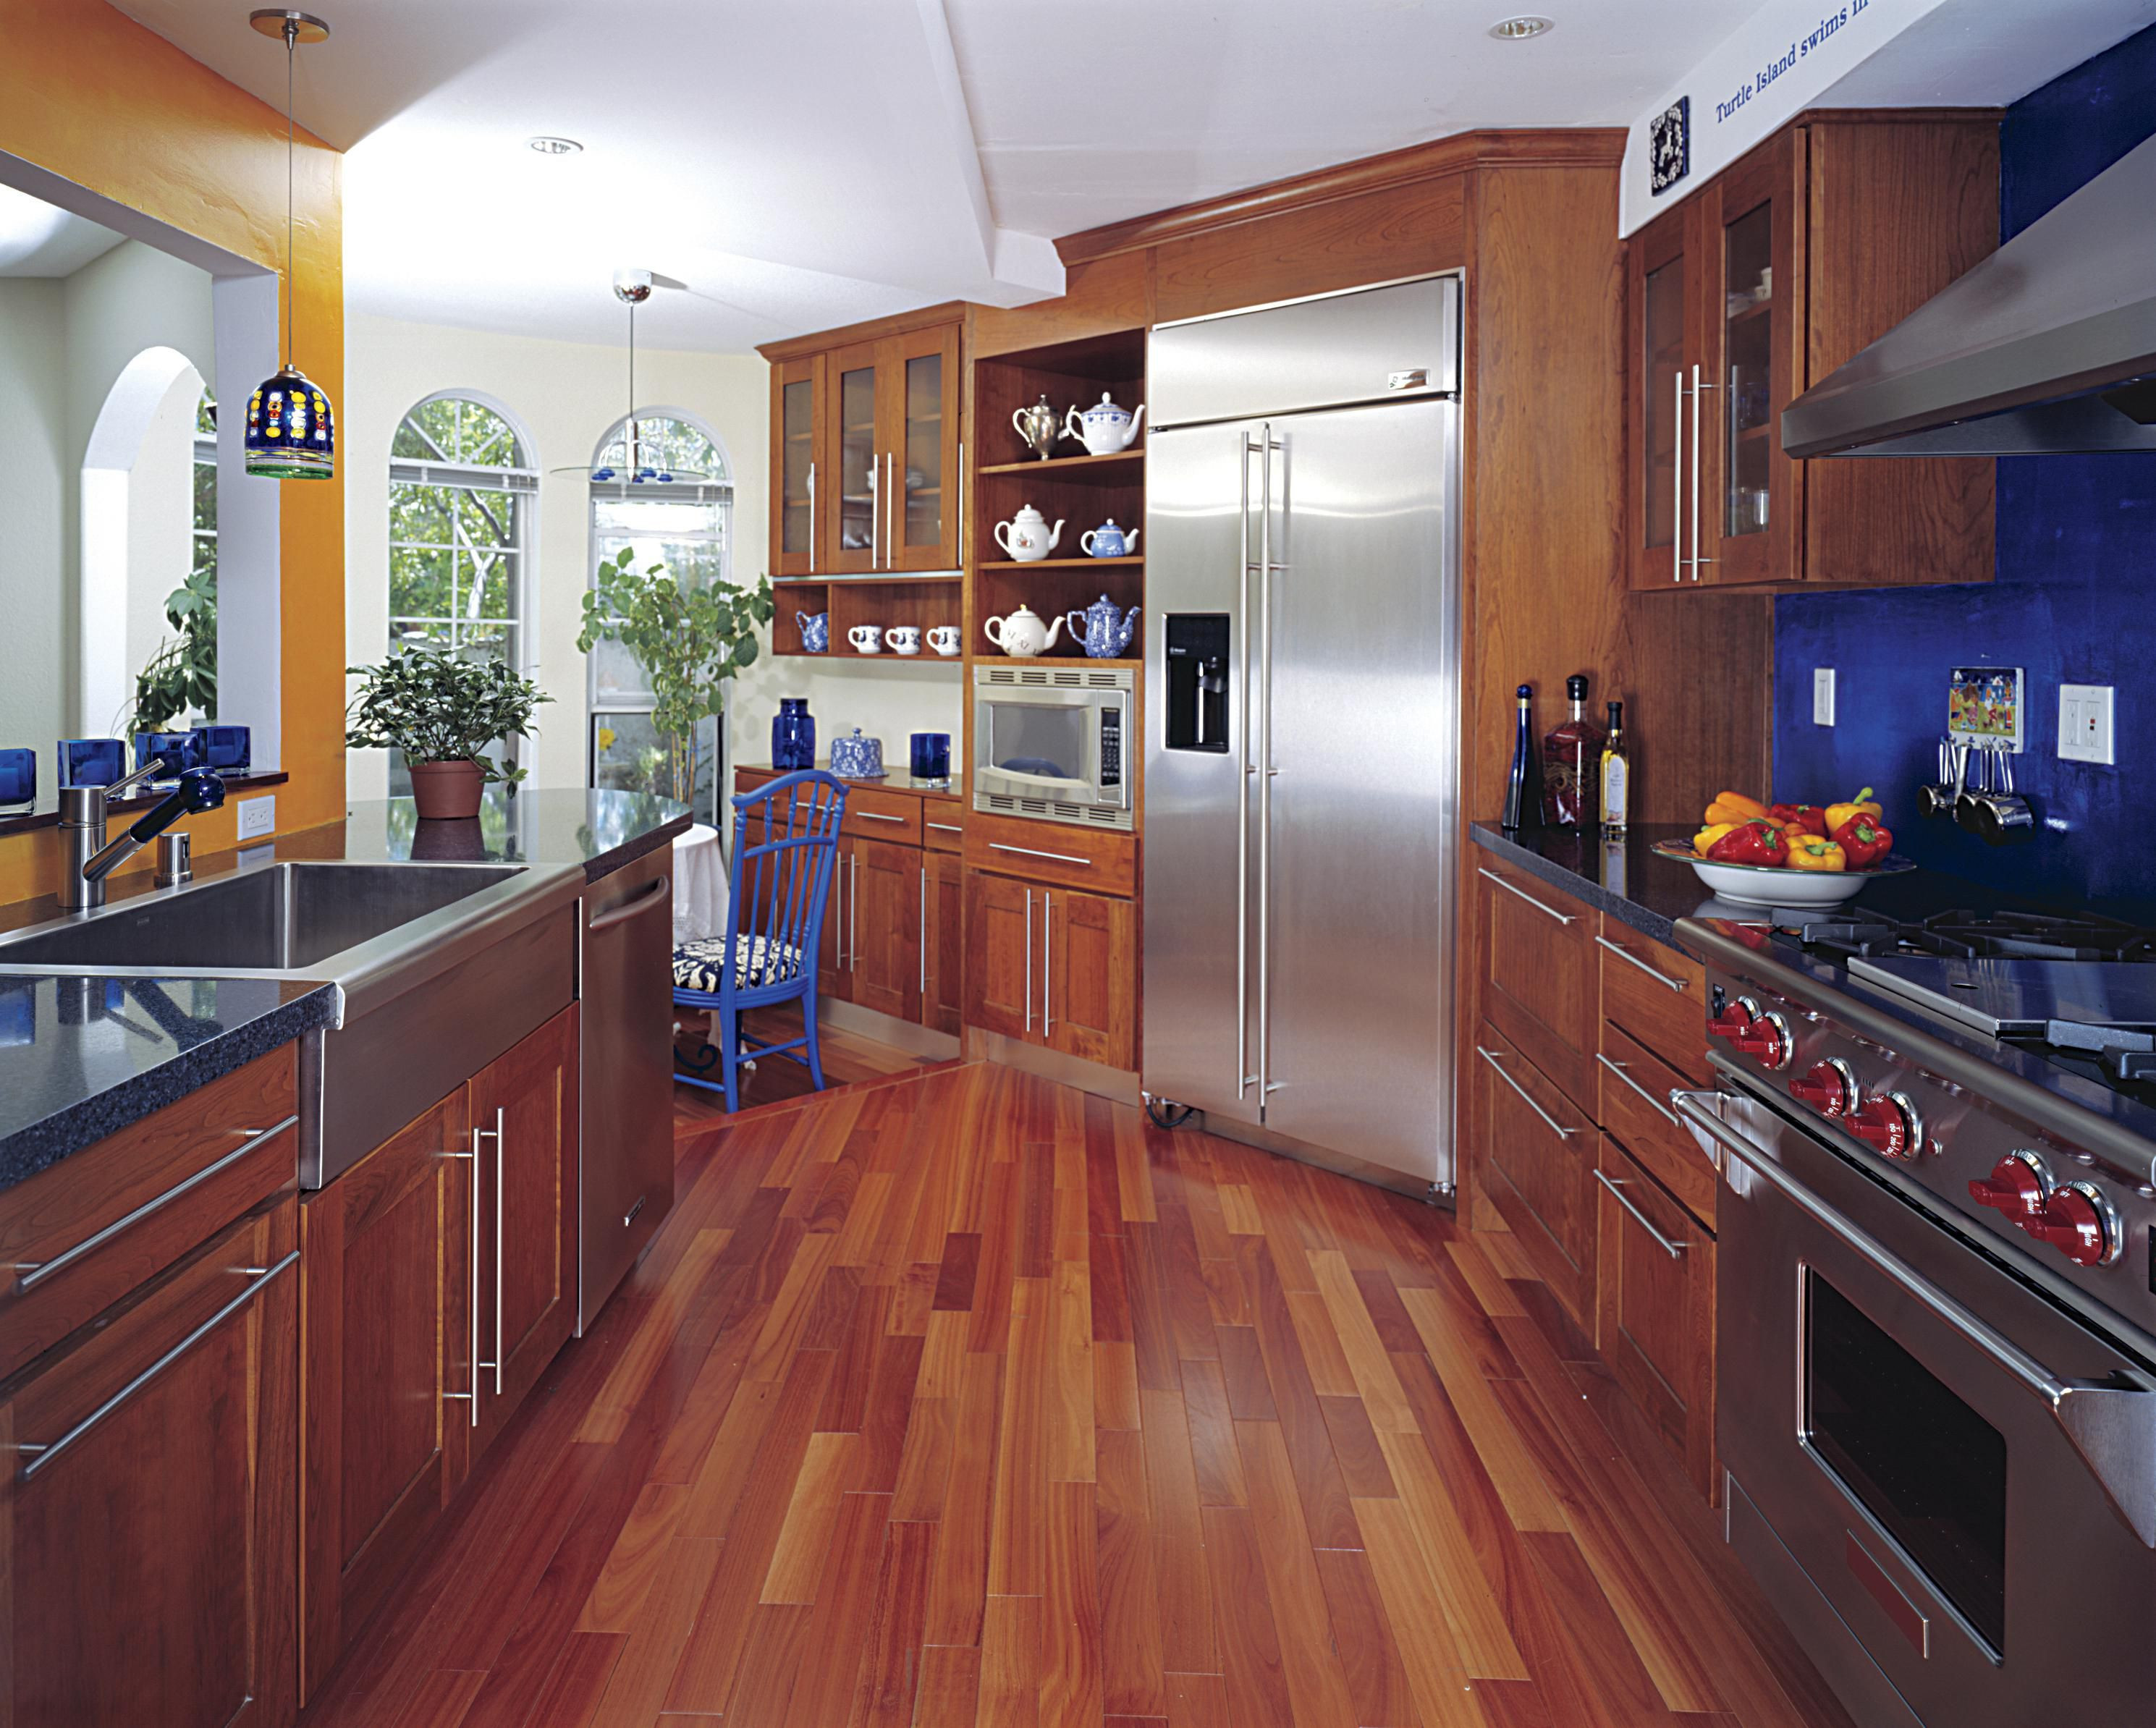 22 Unique Installing solid Hardwood Floors 2024 free download installing solid hardwood floors of hardwood floor in a kitchen is this allowed intended for 186828472 56a49f3a5f9b58b7d0d7e142